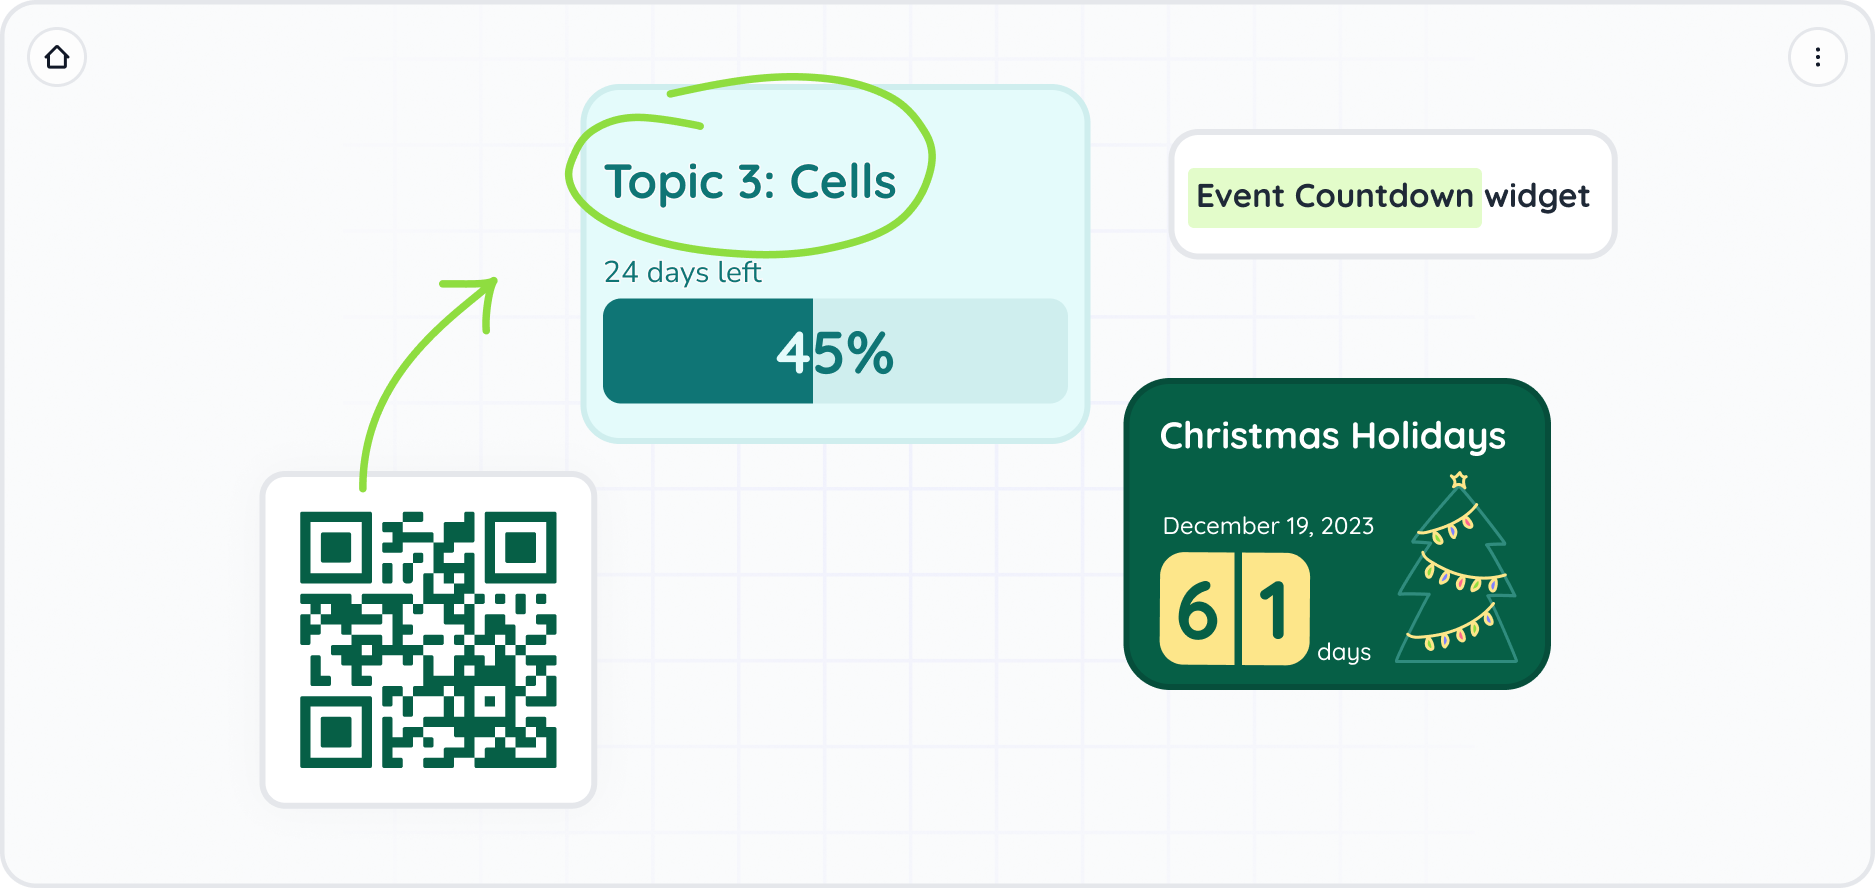 This image shows all the possibilities with our Event Countdown widget, including counting down to the Christmas Holidays and using it to show progress through topics